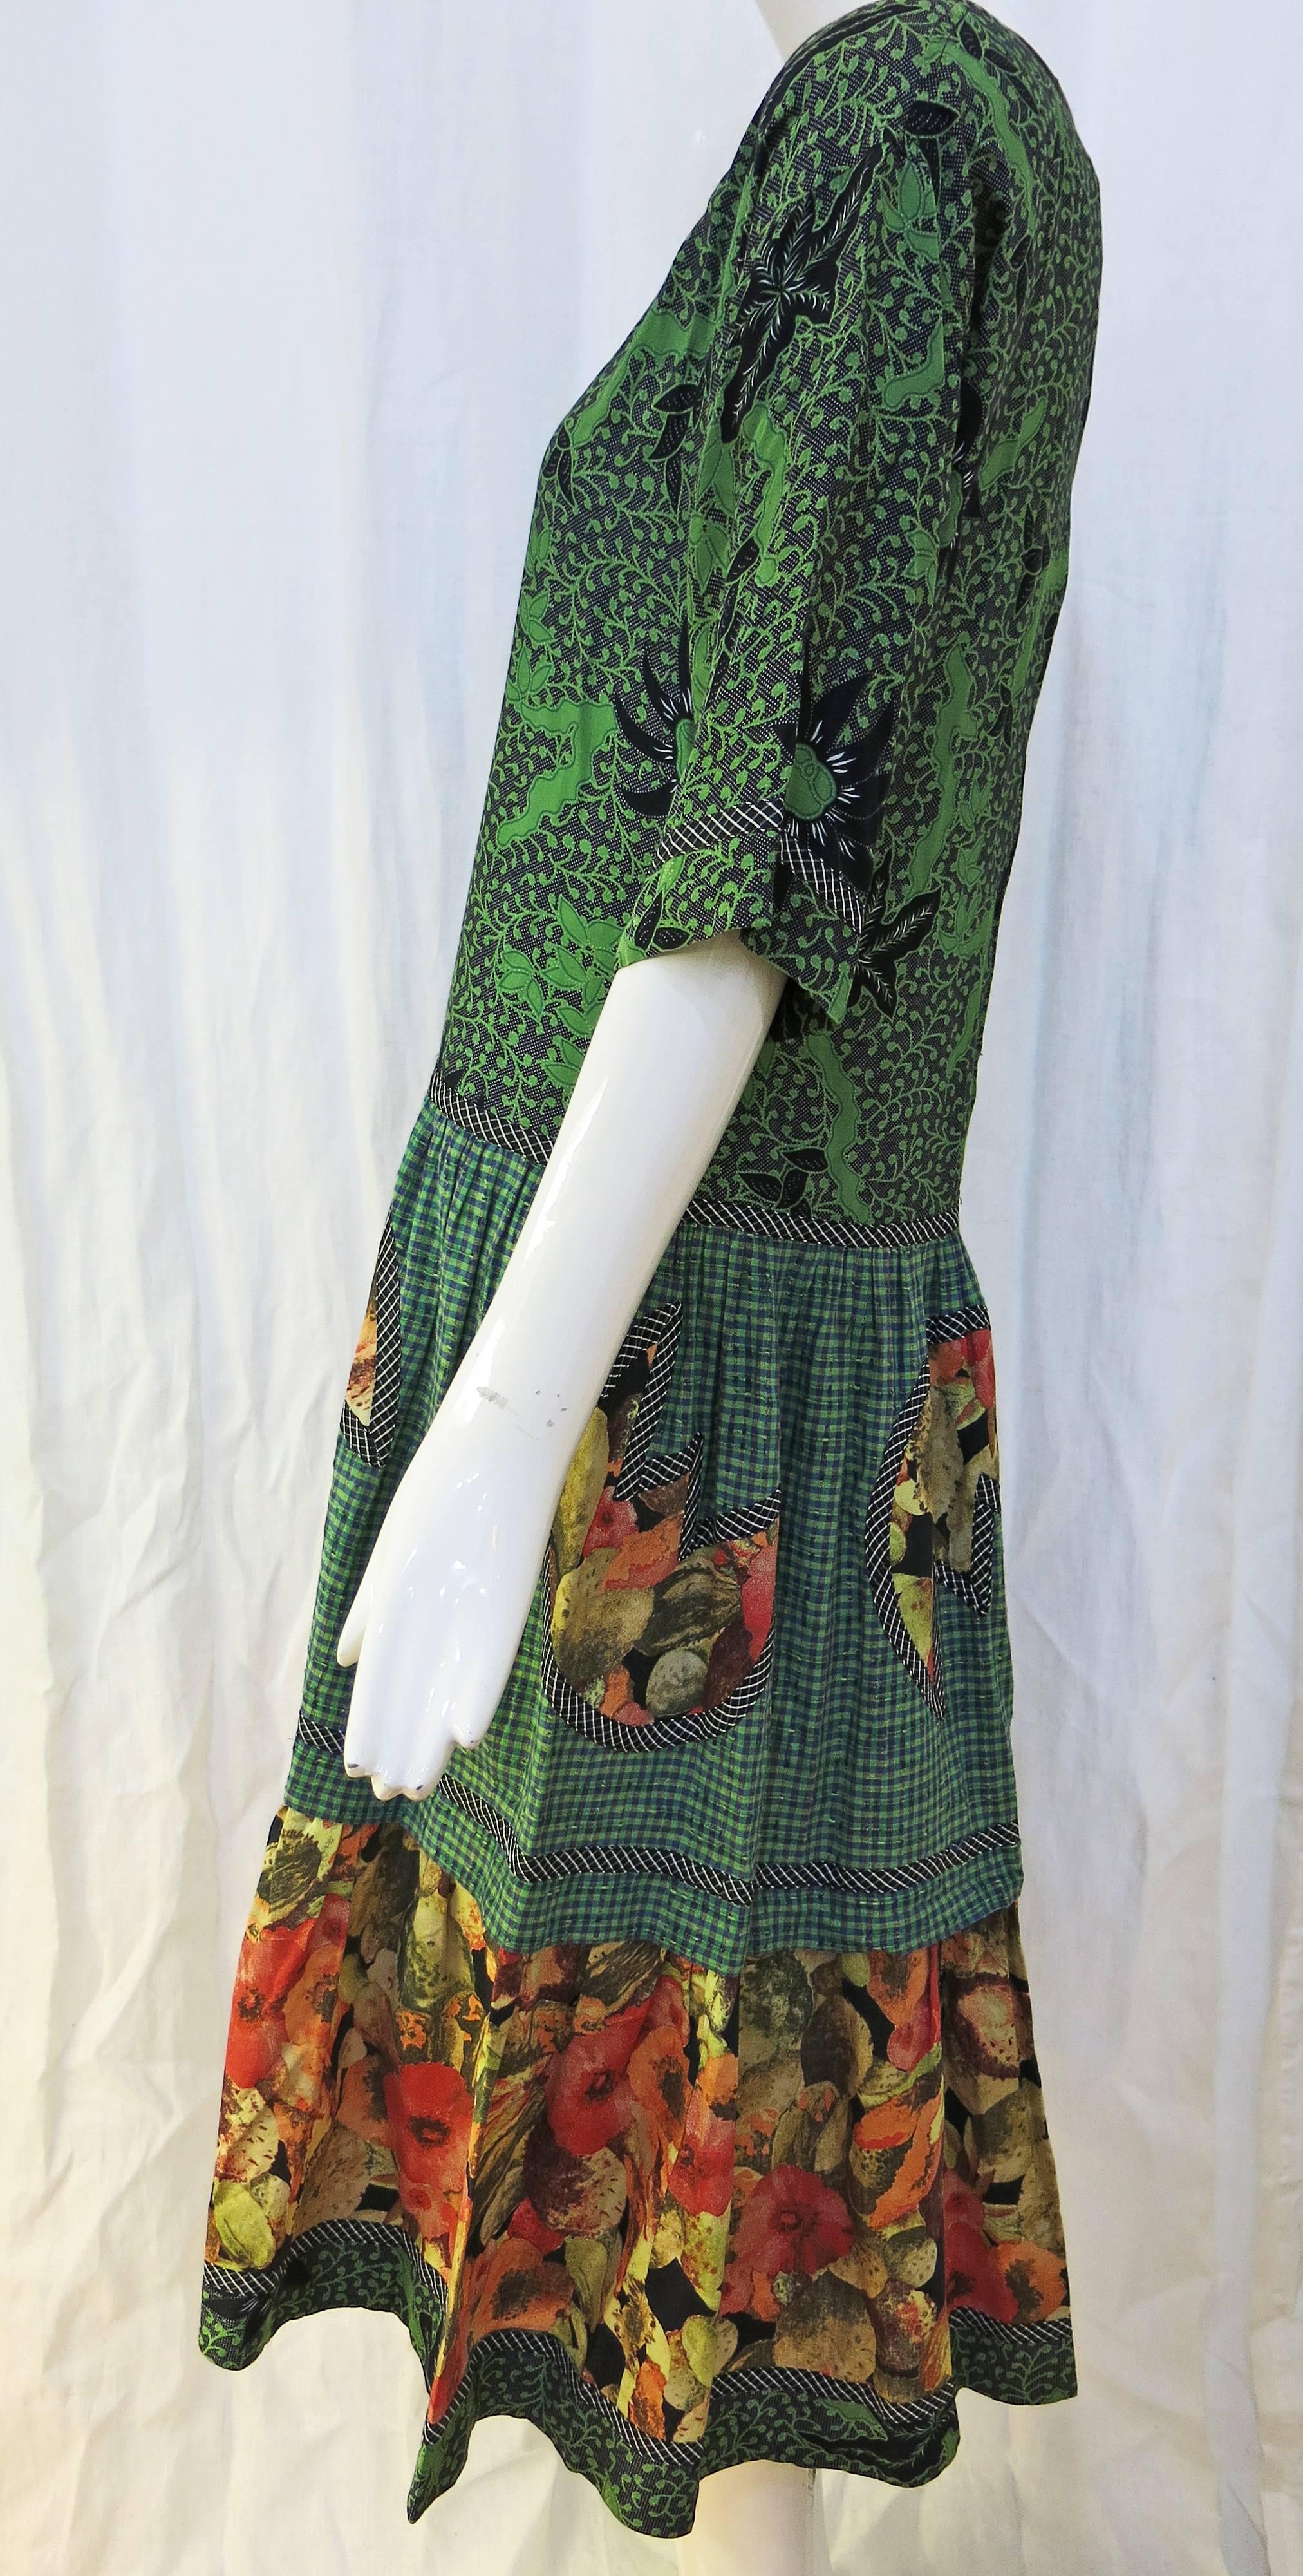 1/2 sleeve lightweight cotton spring dress with the signature Koos mismatching of patterns and colors. The dress features a green/black floral pattern on the bodice with a pink/beige floral yoke. Both patterns are also featured on the hips and